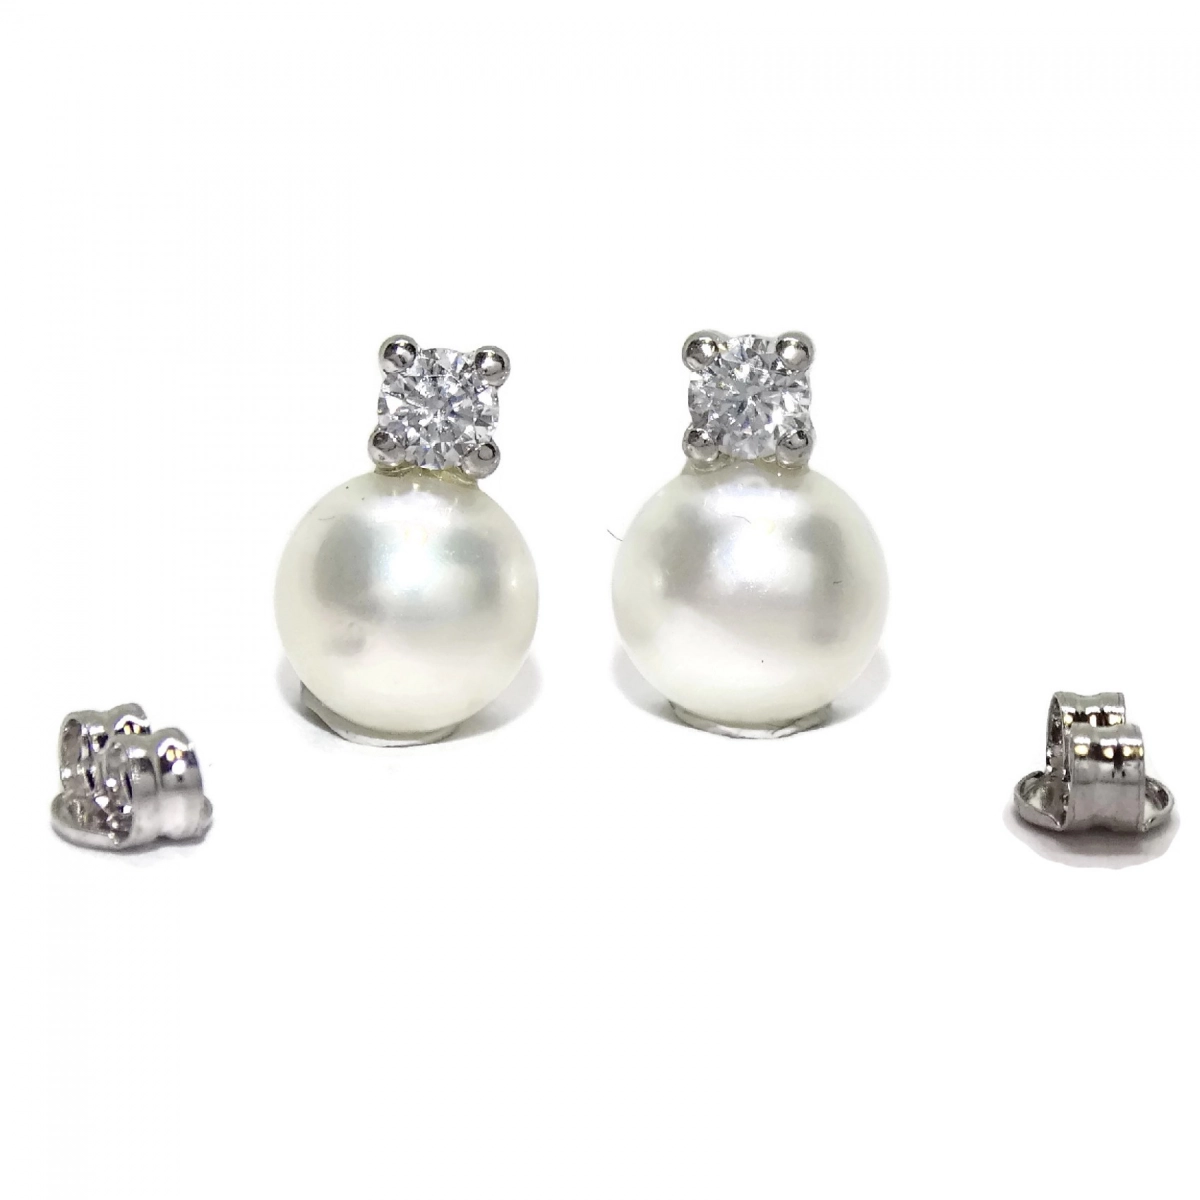 EARRINGS OF WHITE GOLD OF 18KTES WITH 2 CULTURED PEARLS AND ZIRCONS. SPECIAL COMMUNION! NEVER SAY NEVER